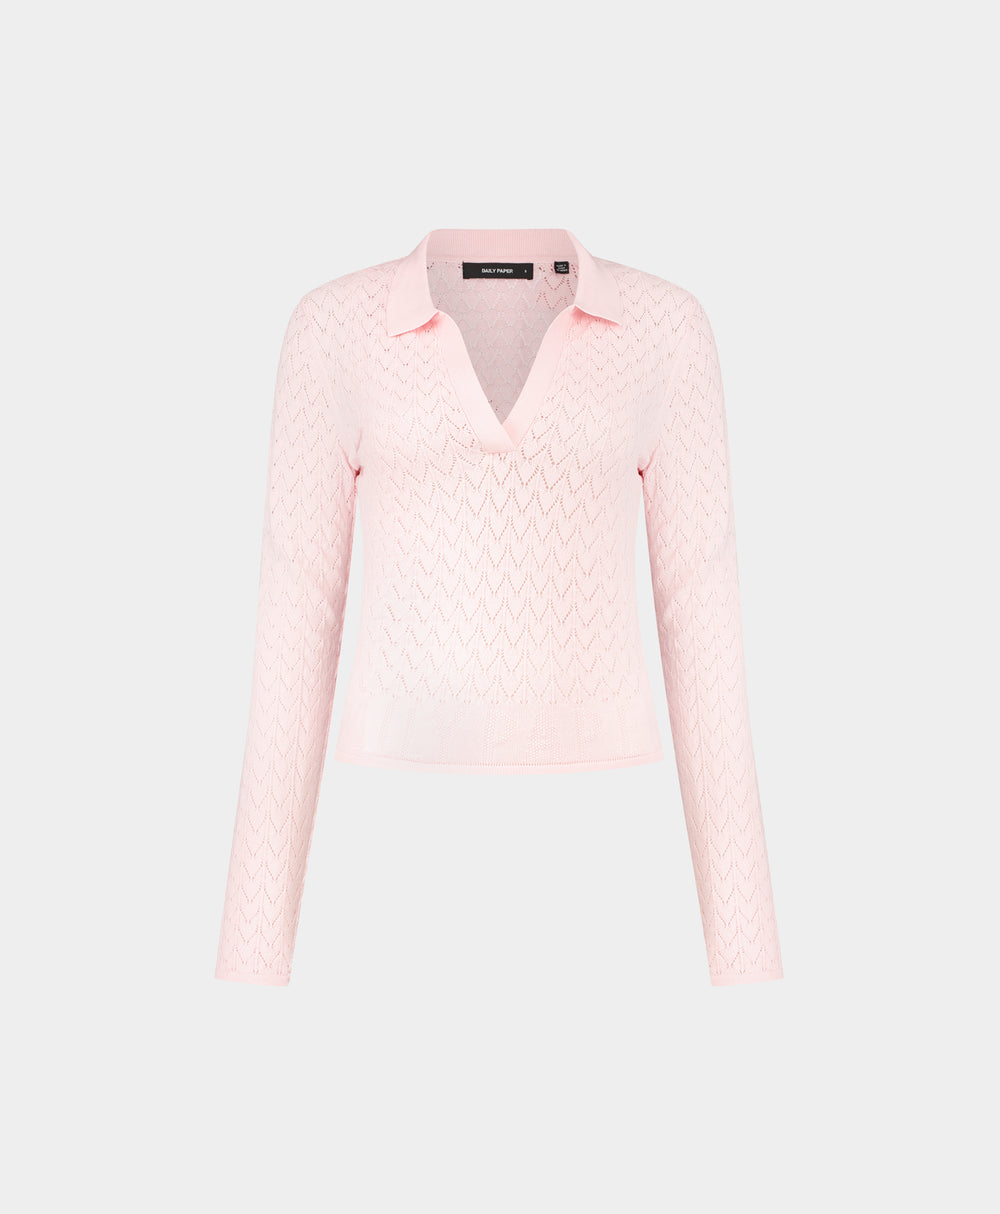 DP - Ice Pink Ada Knit Longsleeve Polo - Packshot - Front